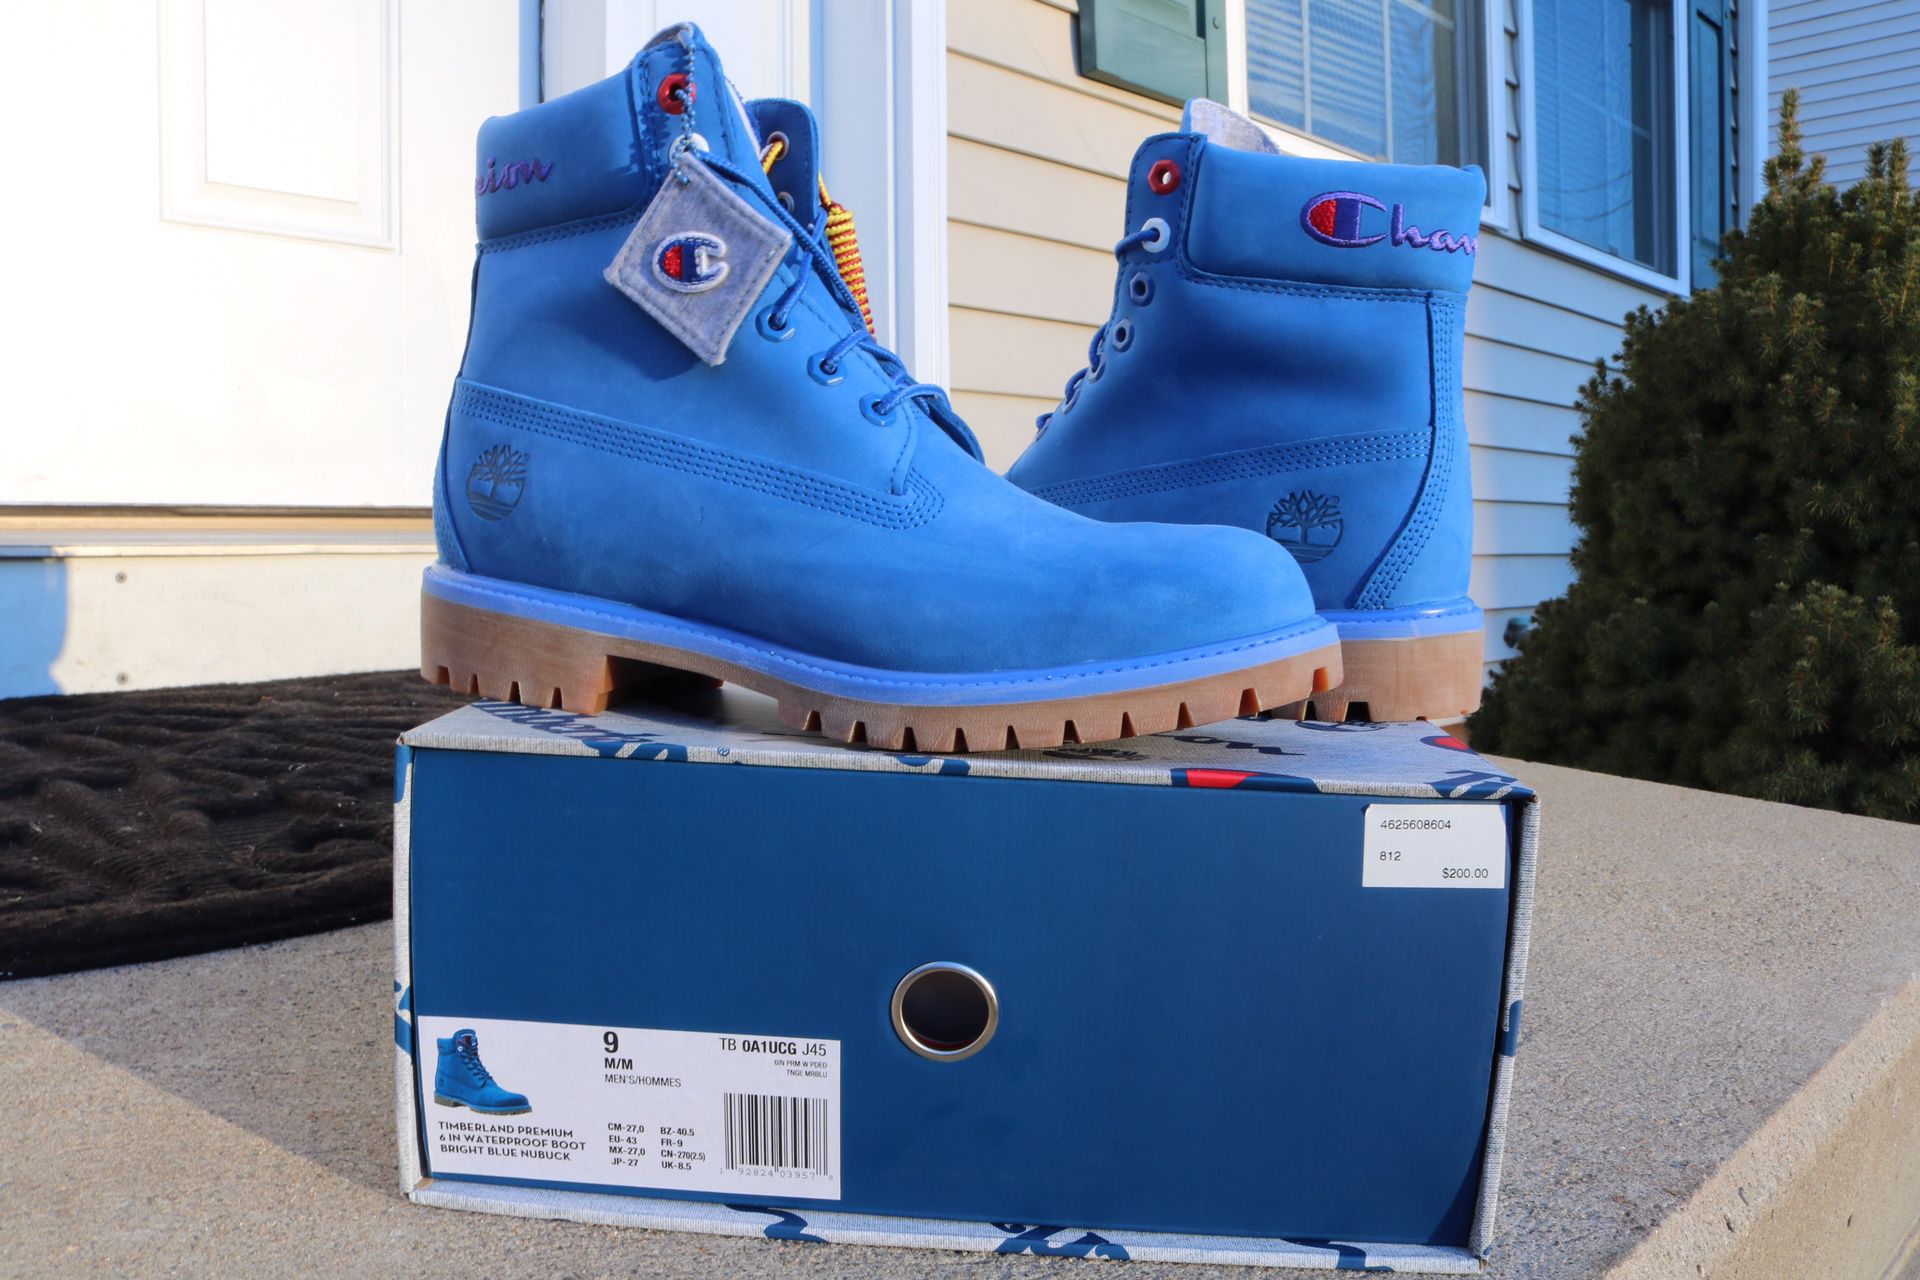 Timberland X Champion Blue Surf Boots for Sale in New Britain, CT 